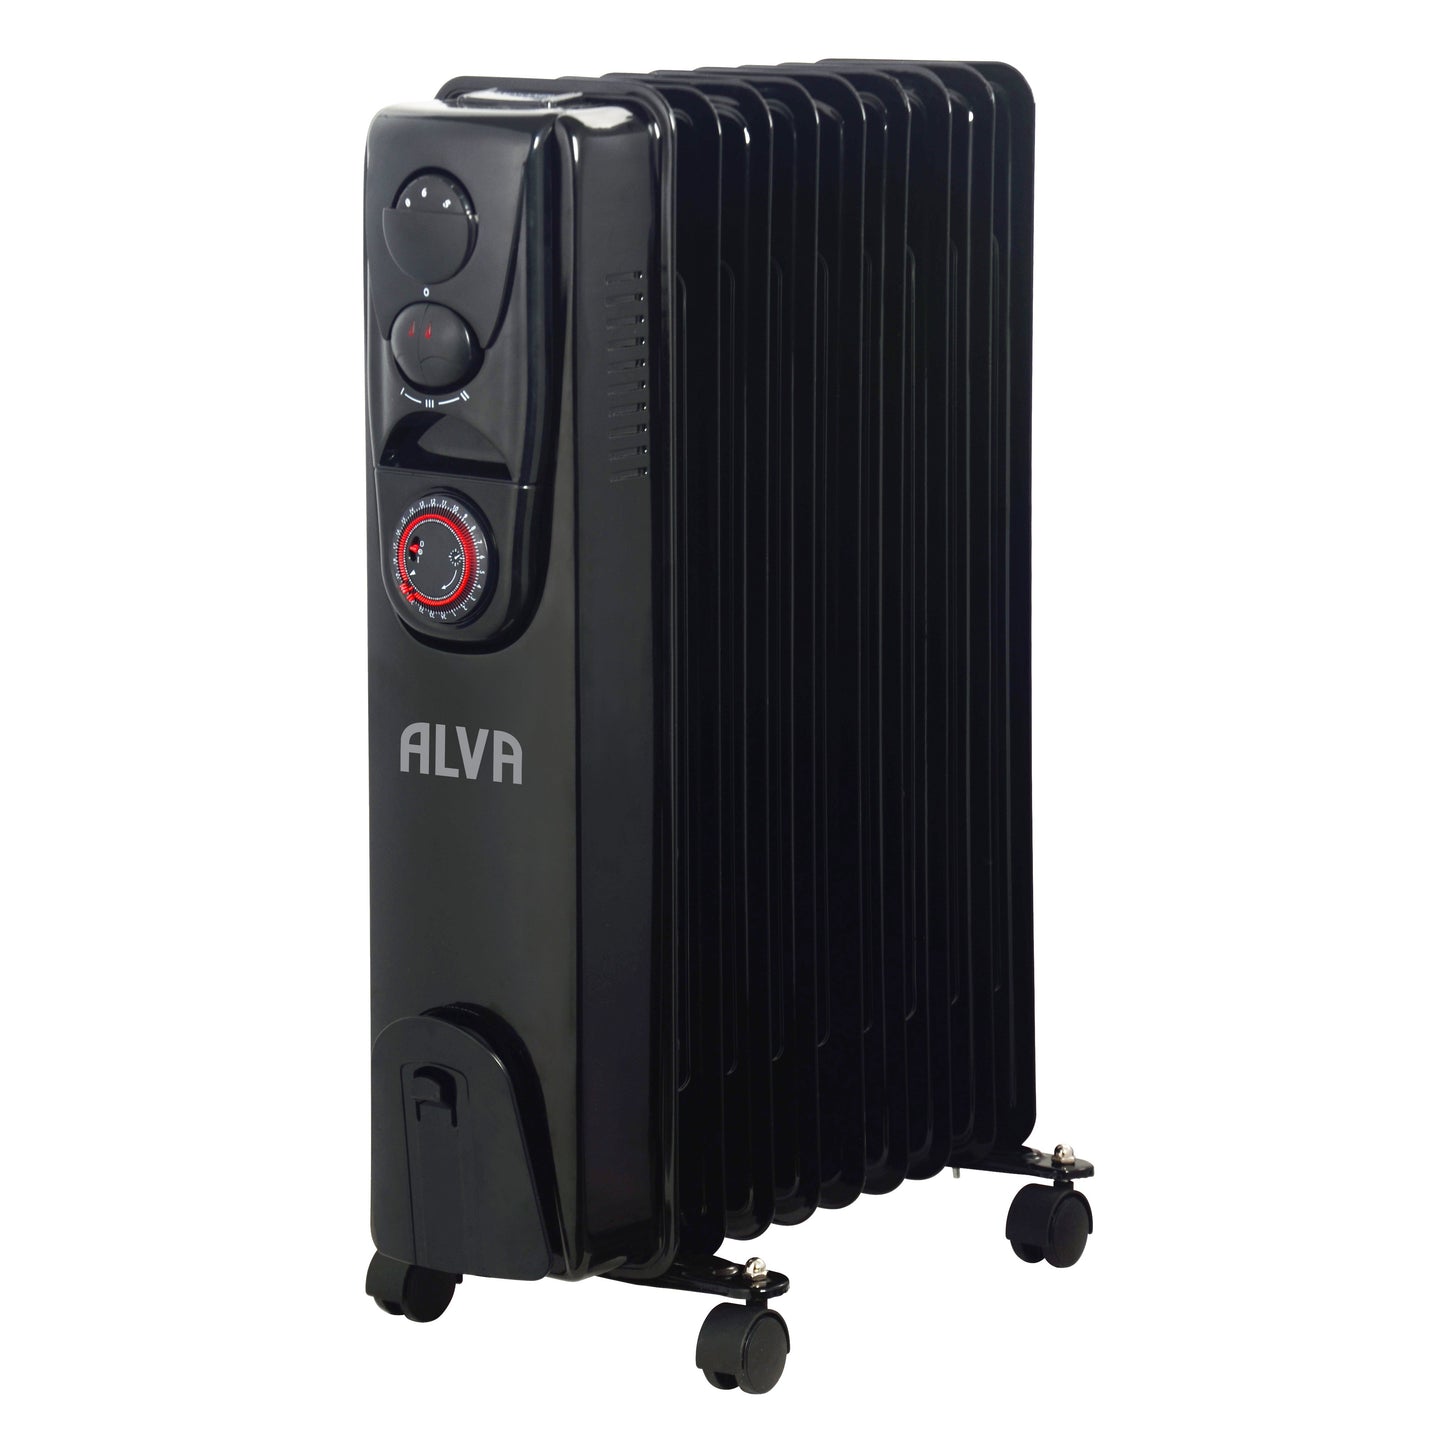 9 FINS 2000W OIL FILLED HEATER - TIMER FUNCTION - GLOSSY BLACK